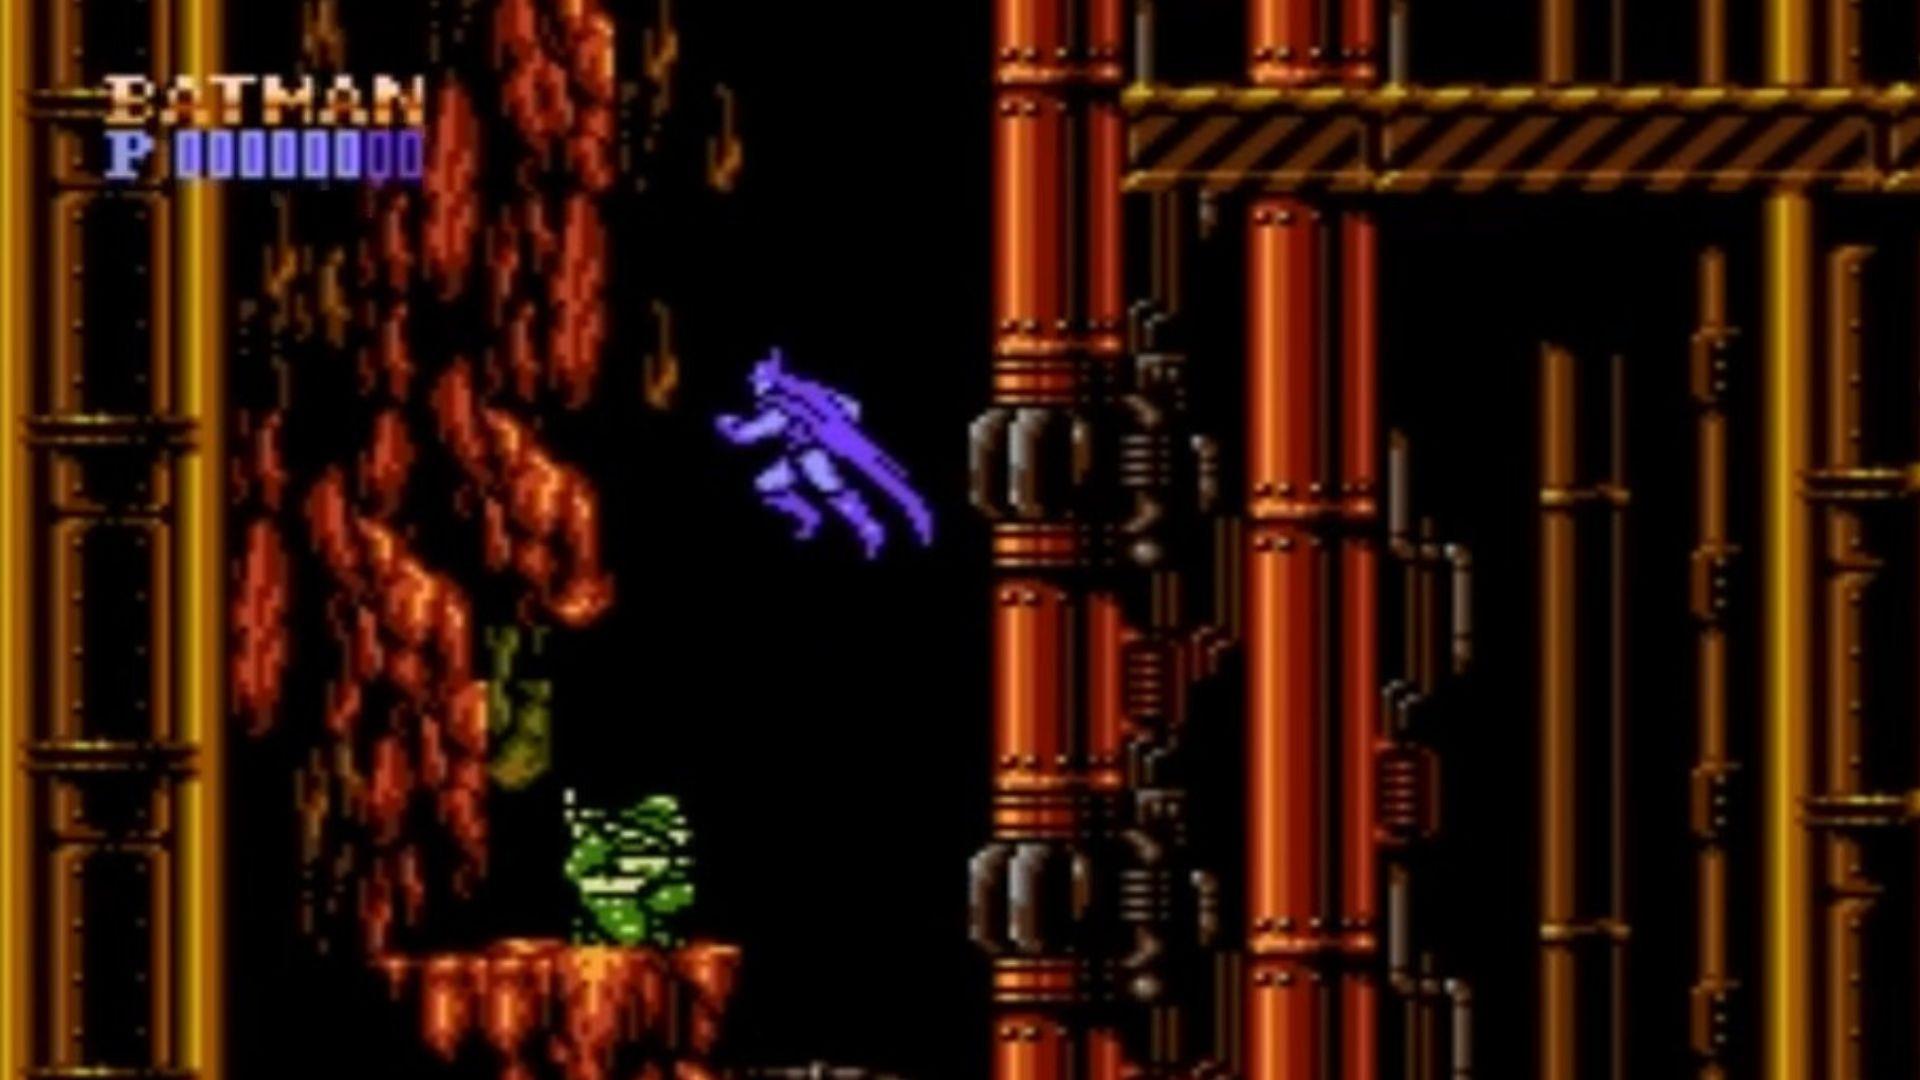 Batman: The Video Game  released exclusively for the NES.